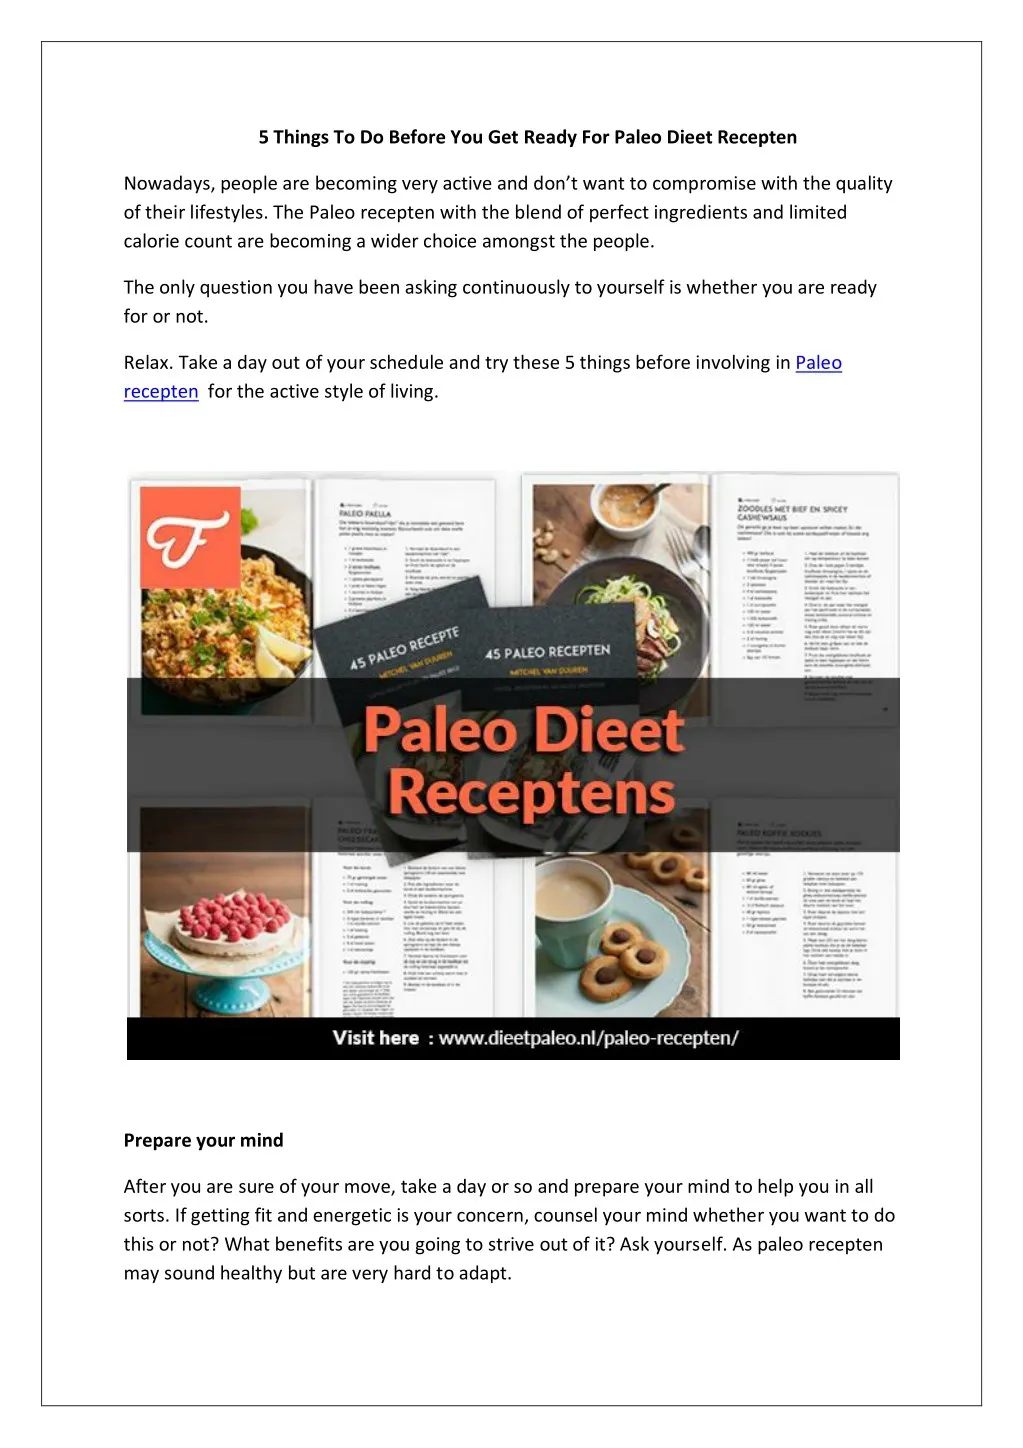 5 things to do before you get ready for paleo